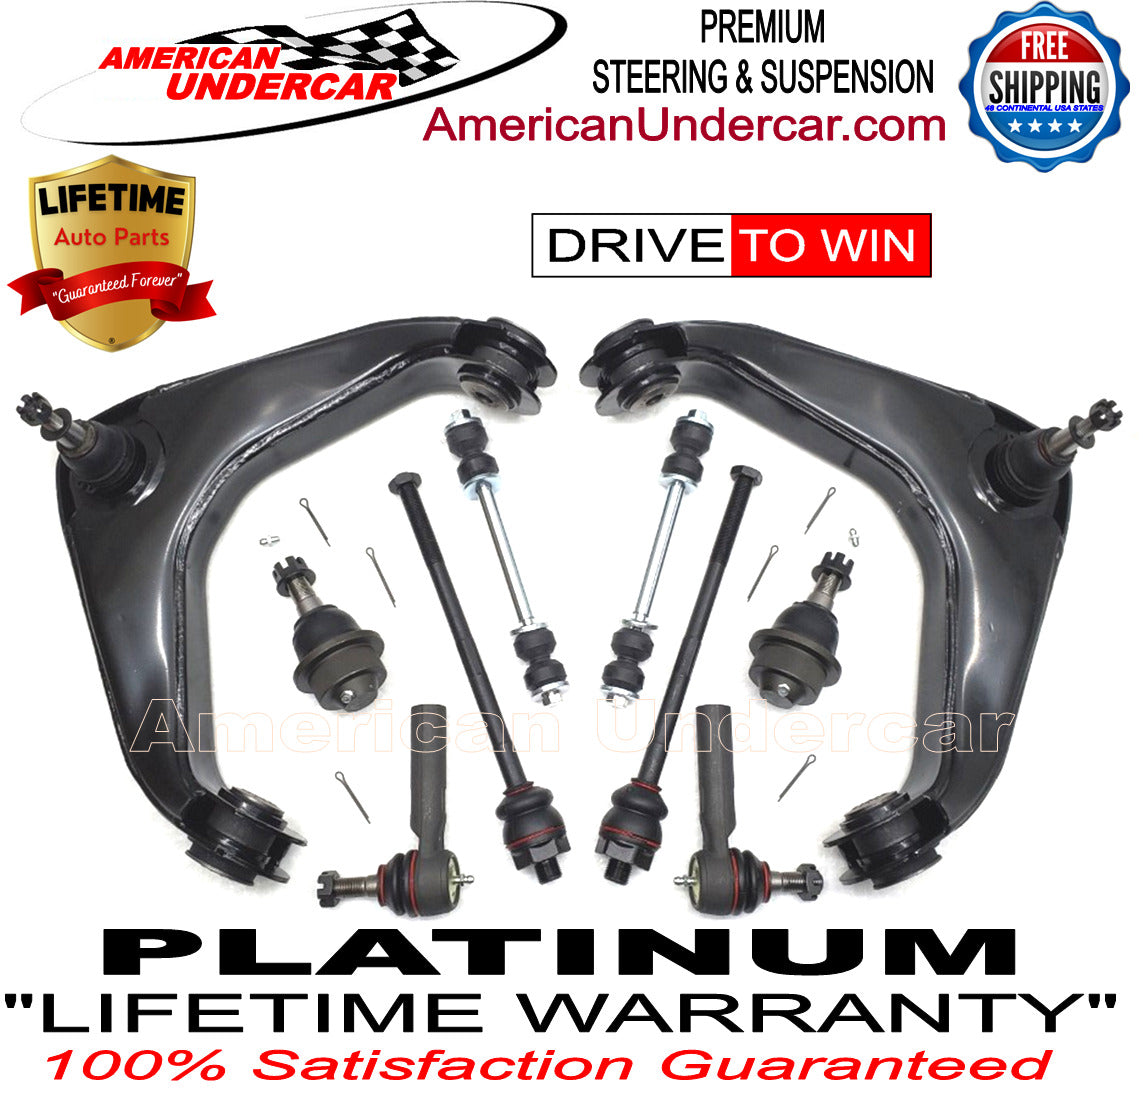 Lifetime Steering and Suspension Kit for 2001-2010 GMC Sierra 2500HD 4x4